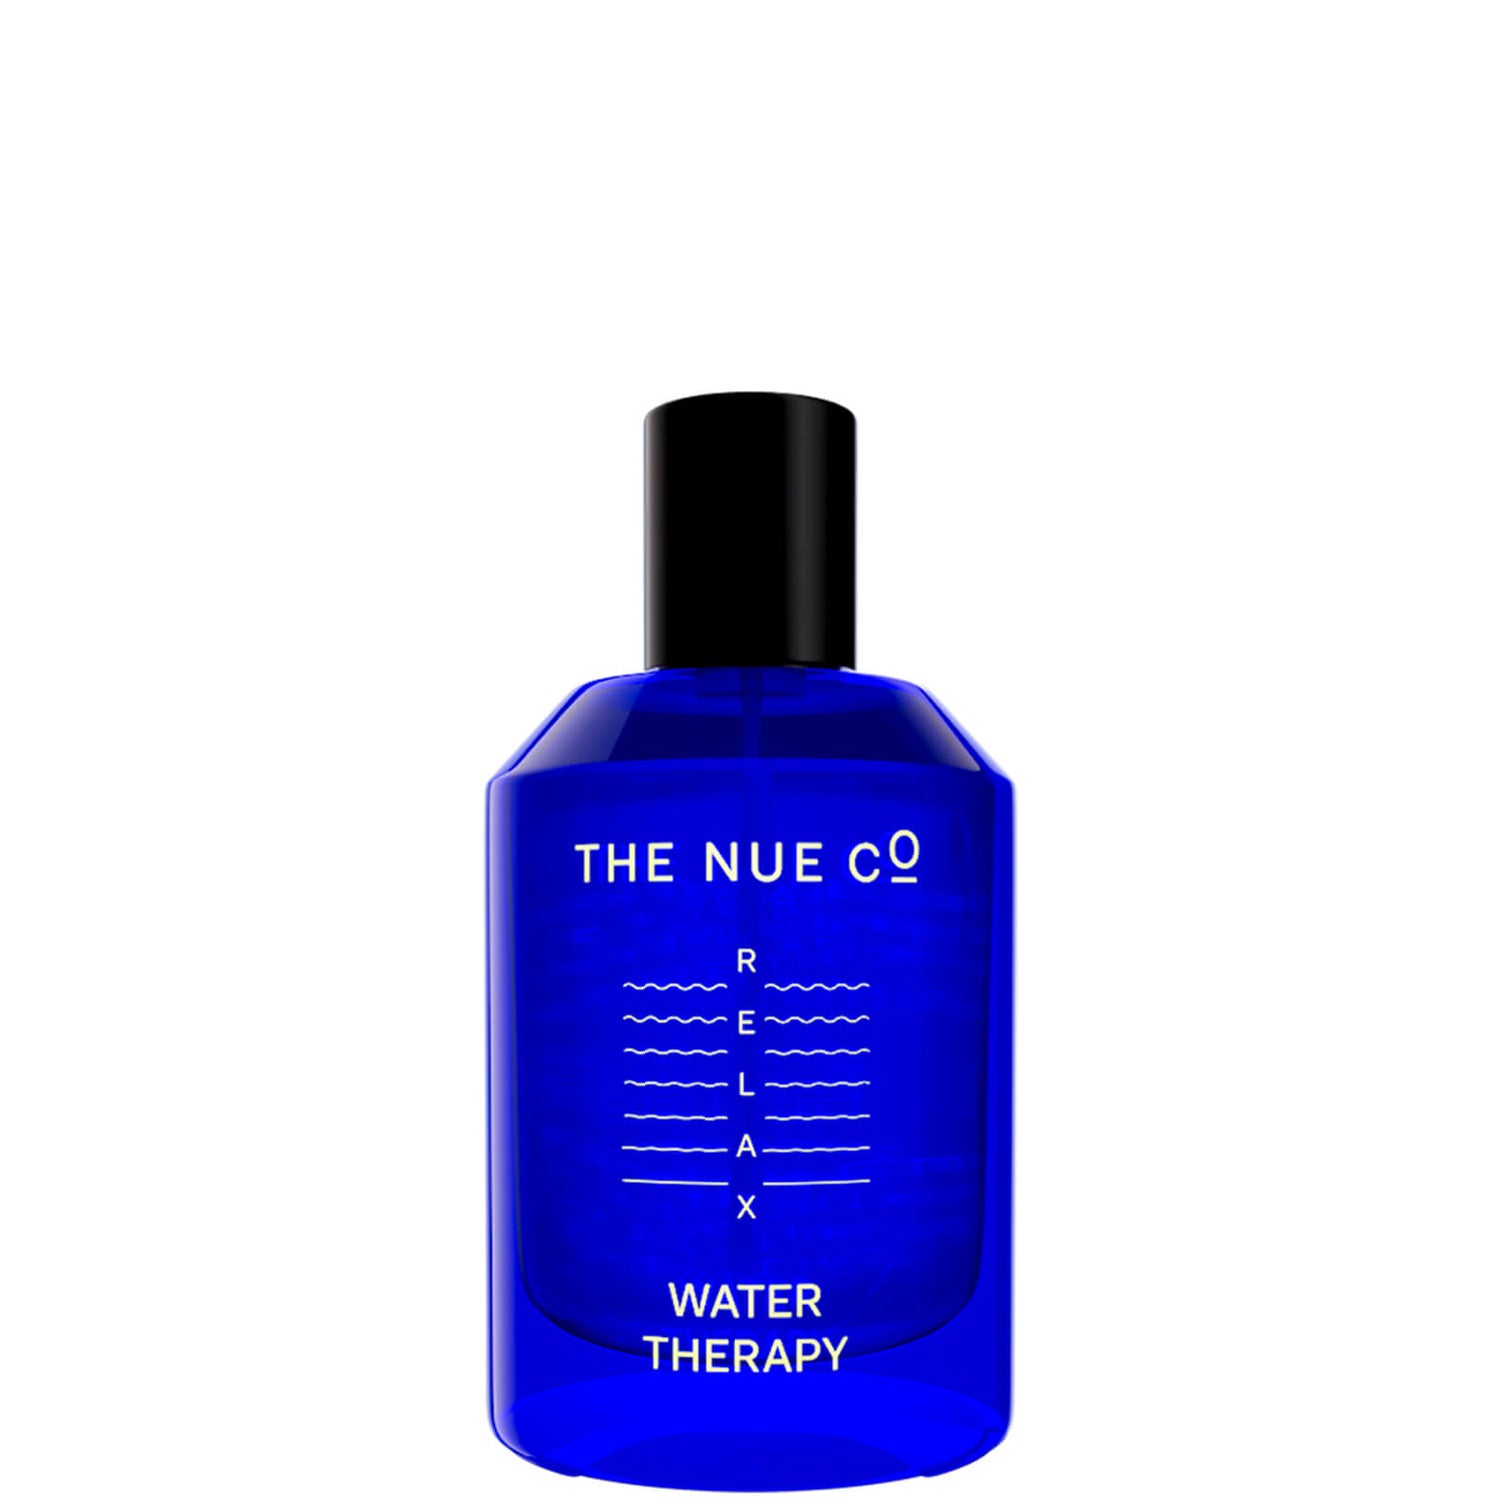 The Nue Co. Water Therapy Relaxing Fragrance 50ml